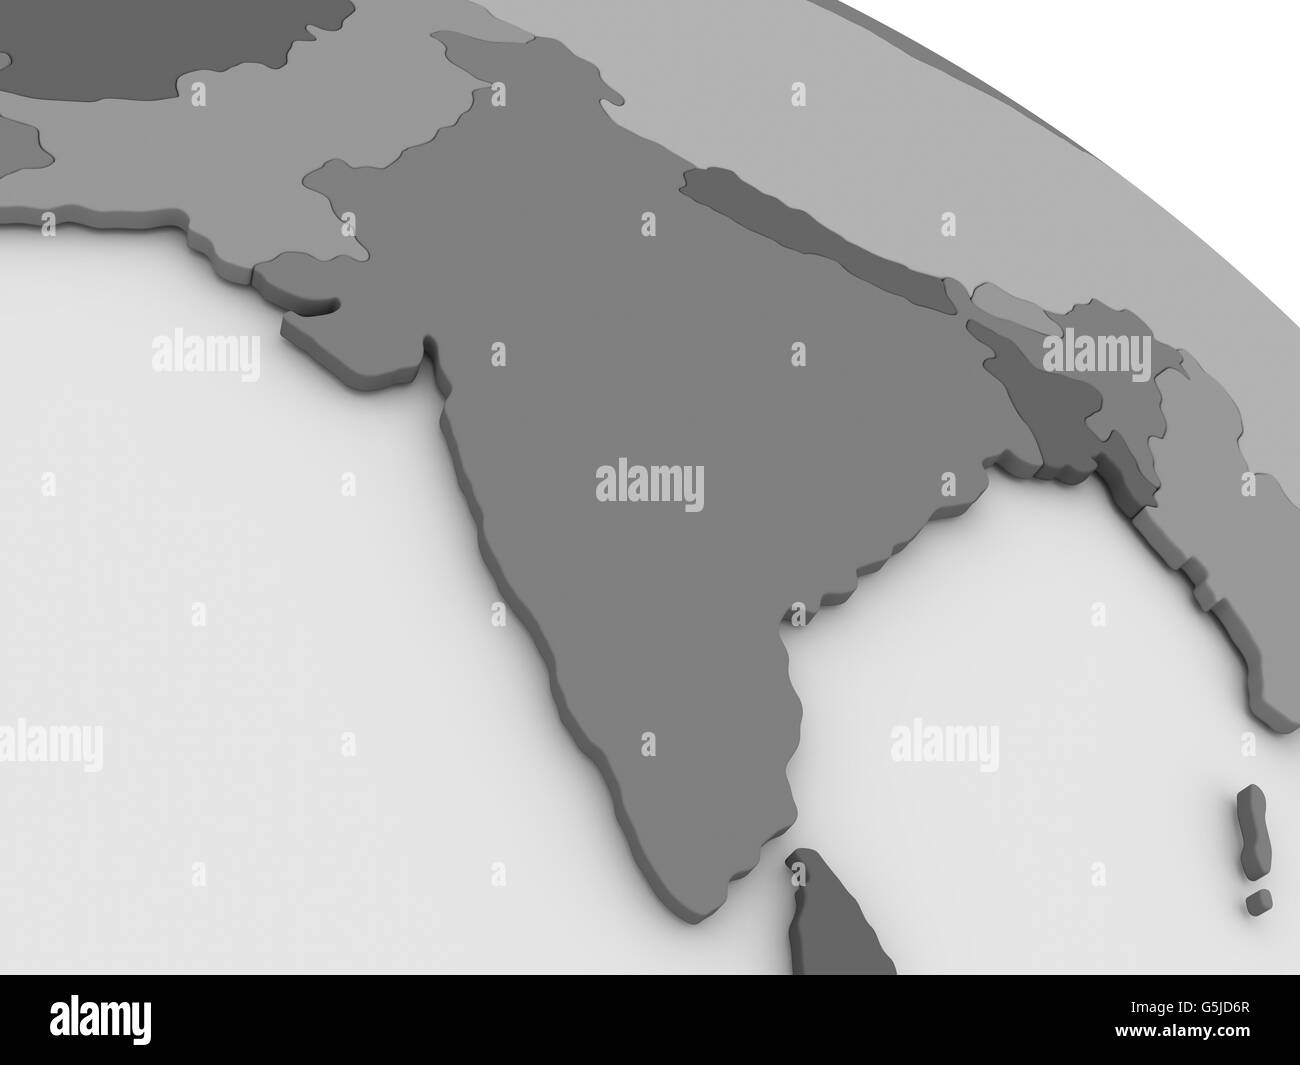 Map of India on grey model of Earth. 3D illustration Stock Photo